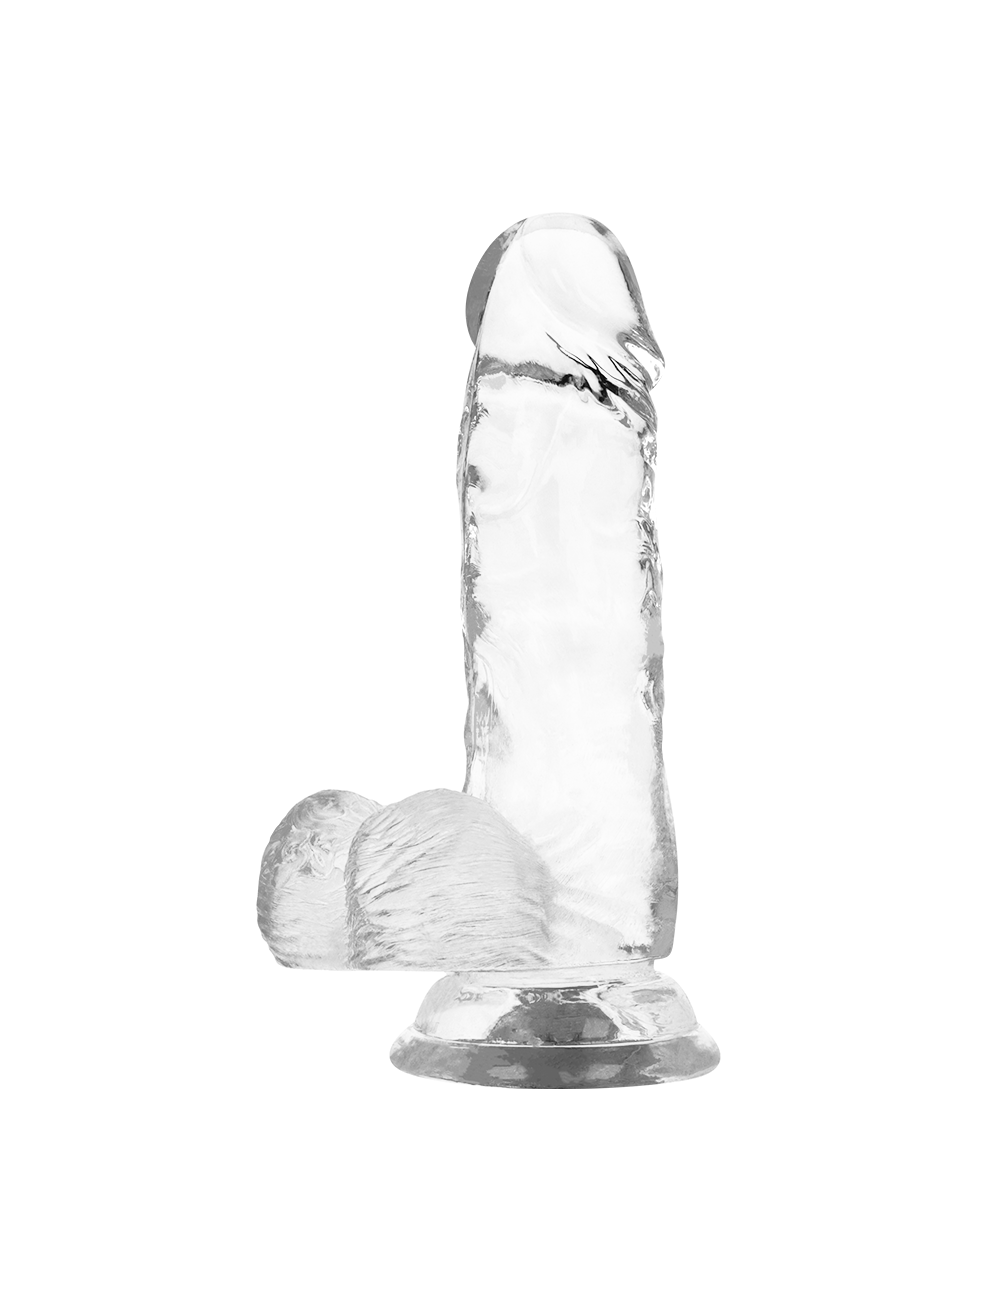 XRAY CLEAR COCK WITH BALLS  15.5CM X 3.5CM